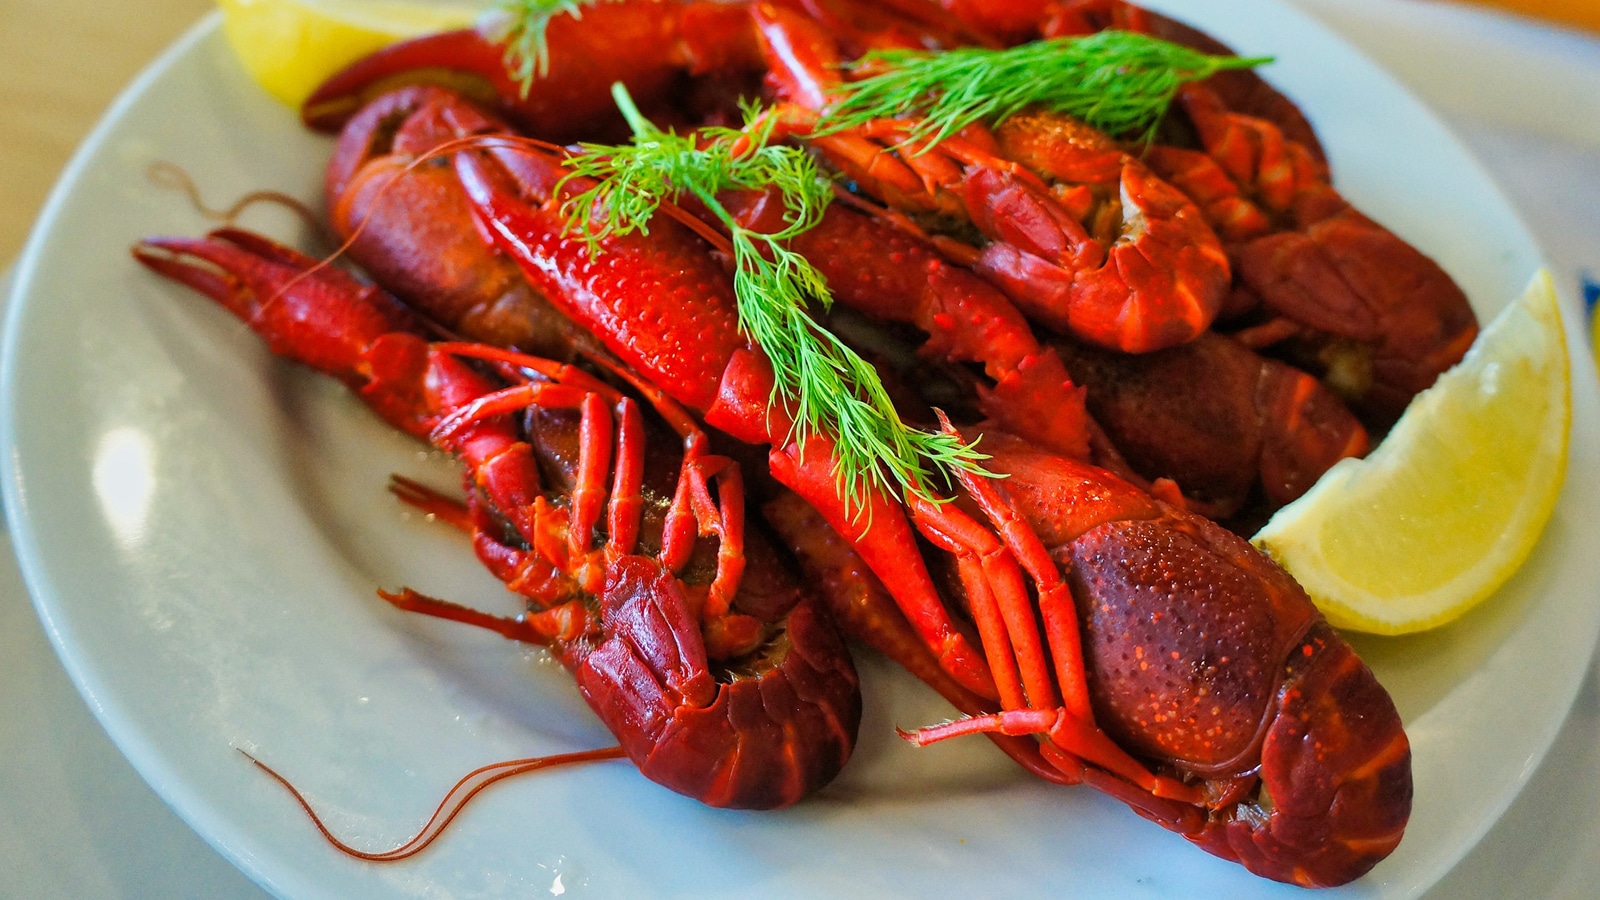 Lobster For High-End Dinning - Best Seafood In Key West